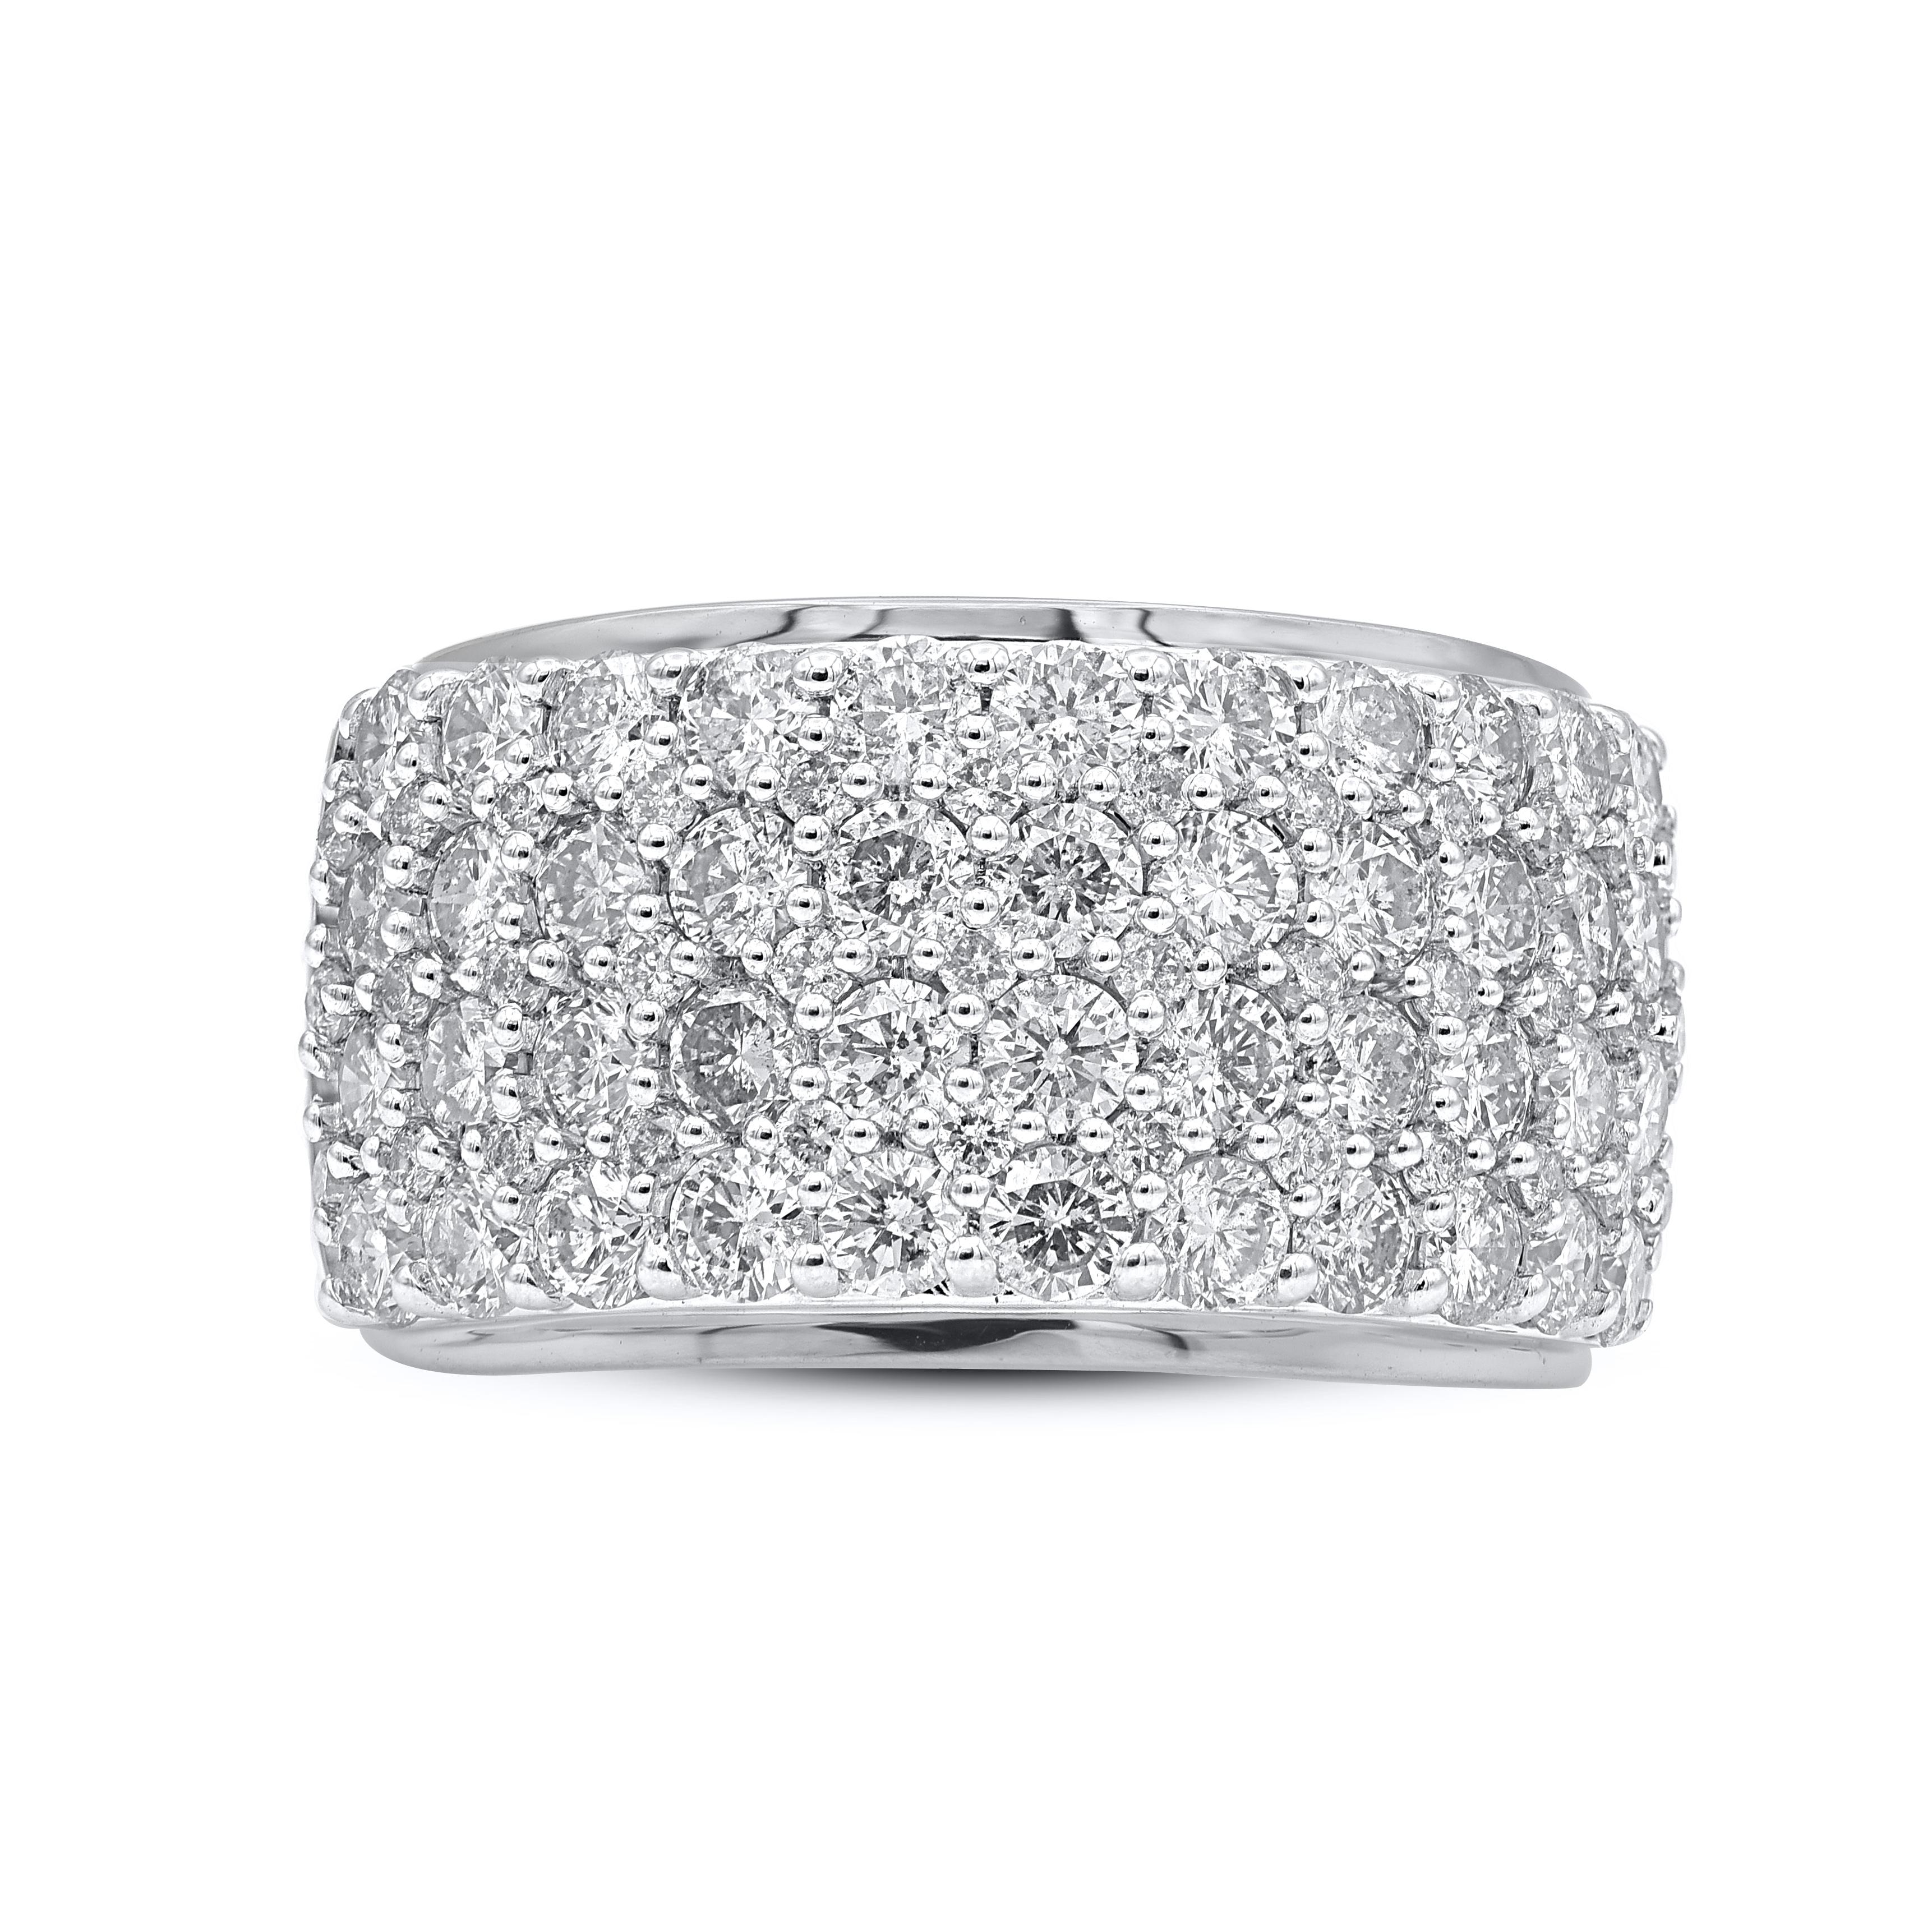 Stunning and classic, this diamond ring is beautifully crafted in 14 K Solid White gold. The fashion band features 3.00 ct of 80 round diamonds in secured prong settings. The diamonds are natural, not-treated and conflict-free with H-I color and I2